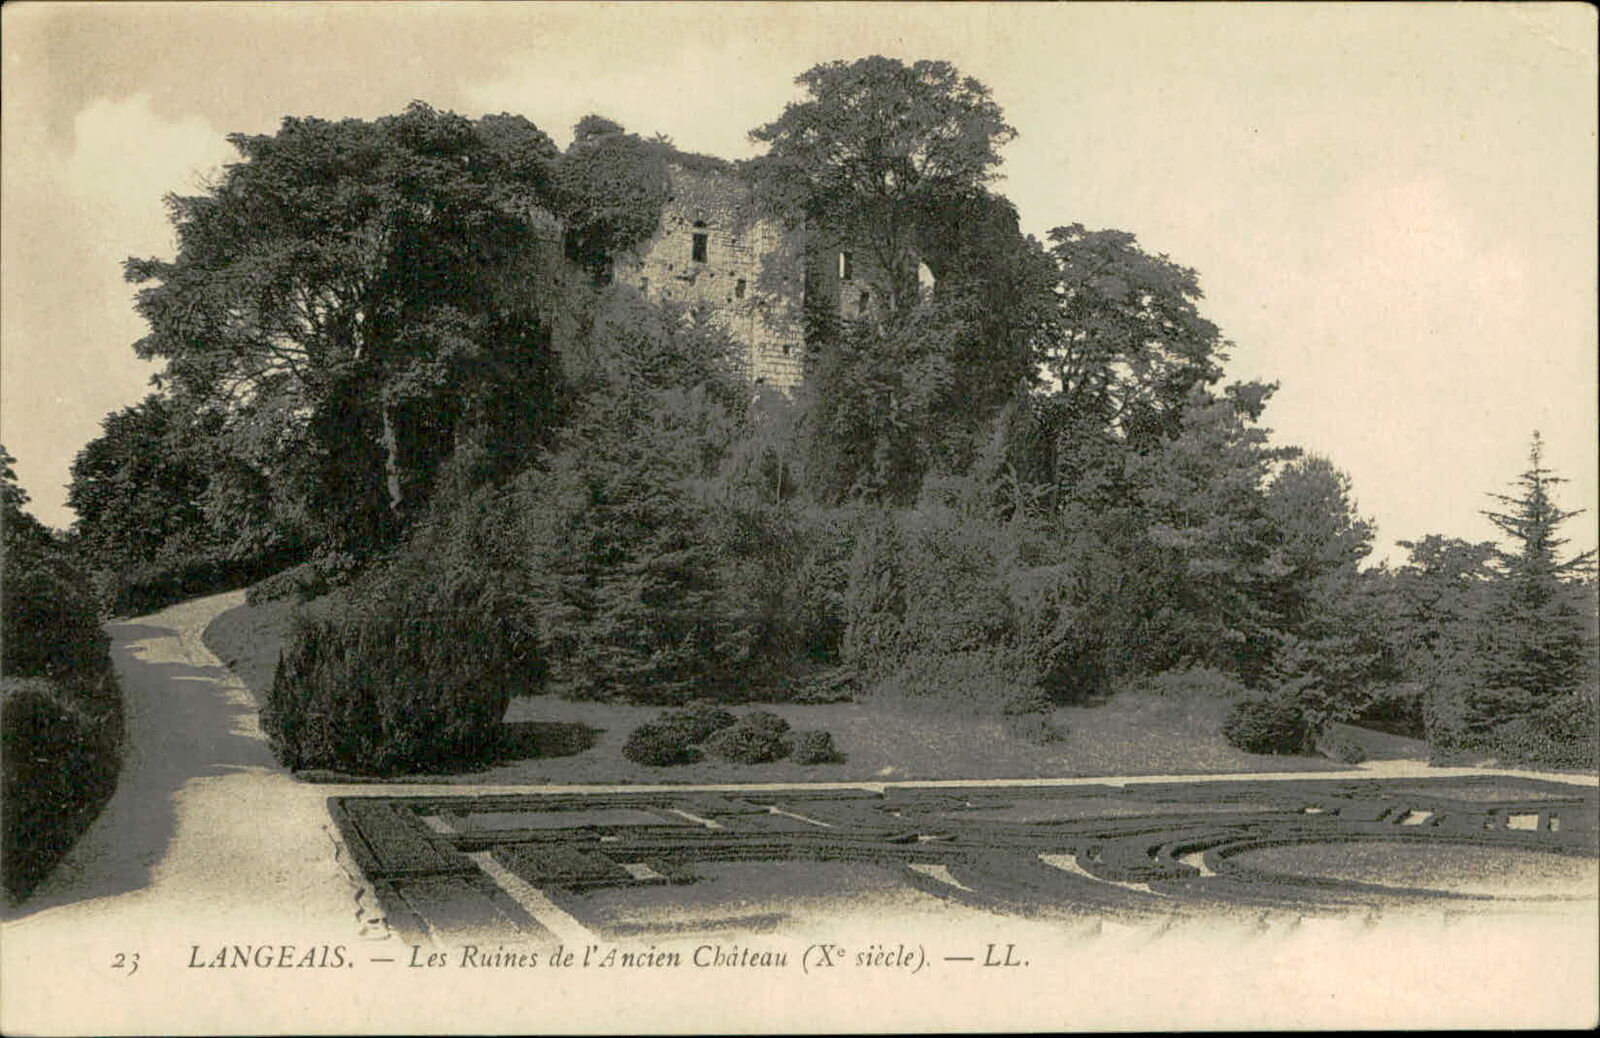 Postcard: The Ruins of the Old Castle